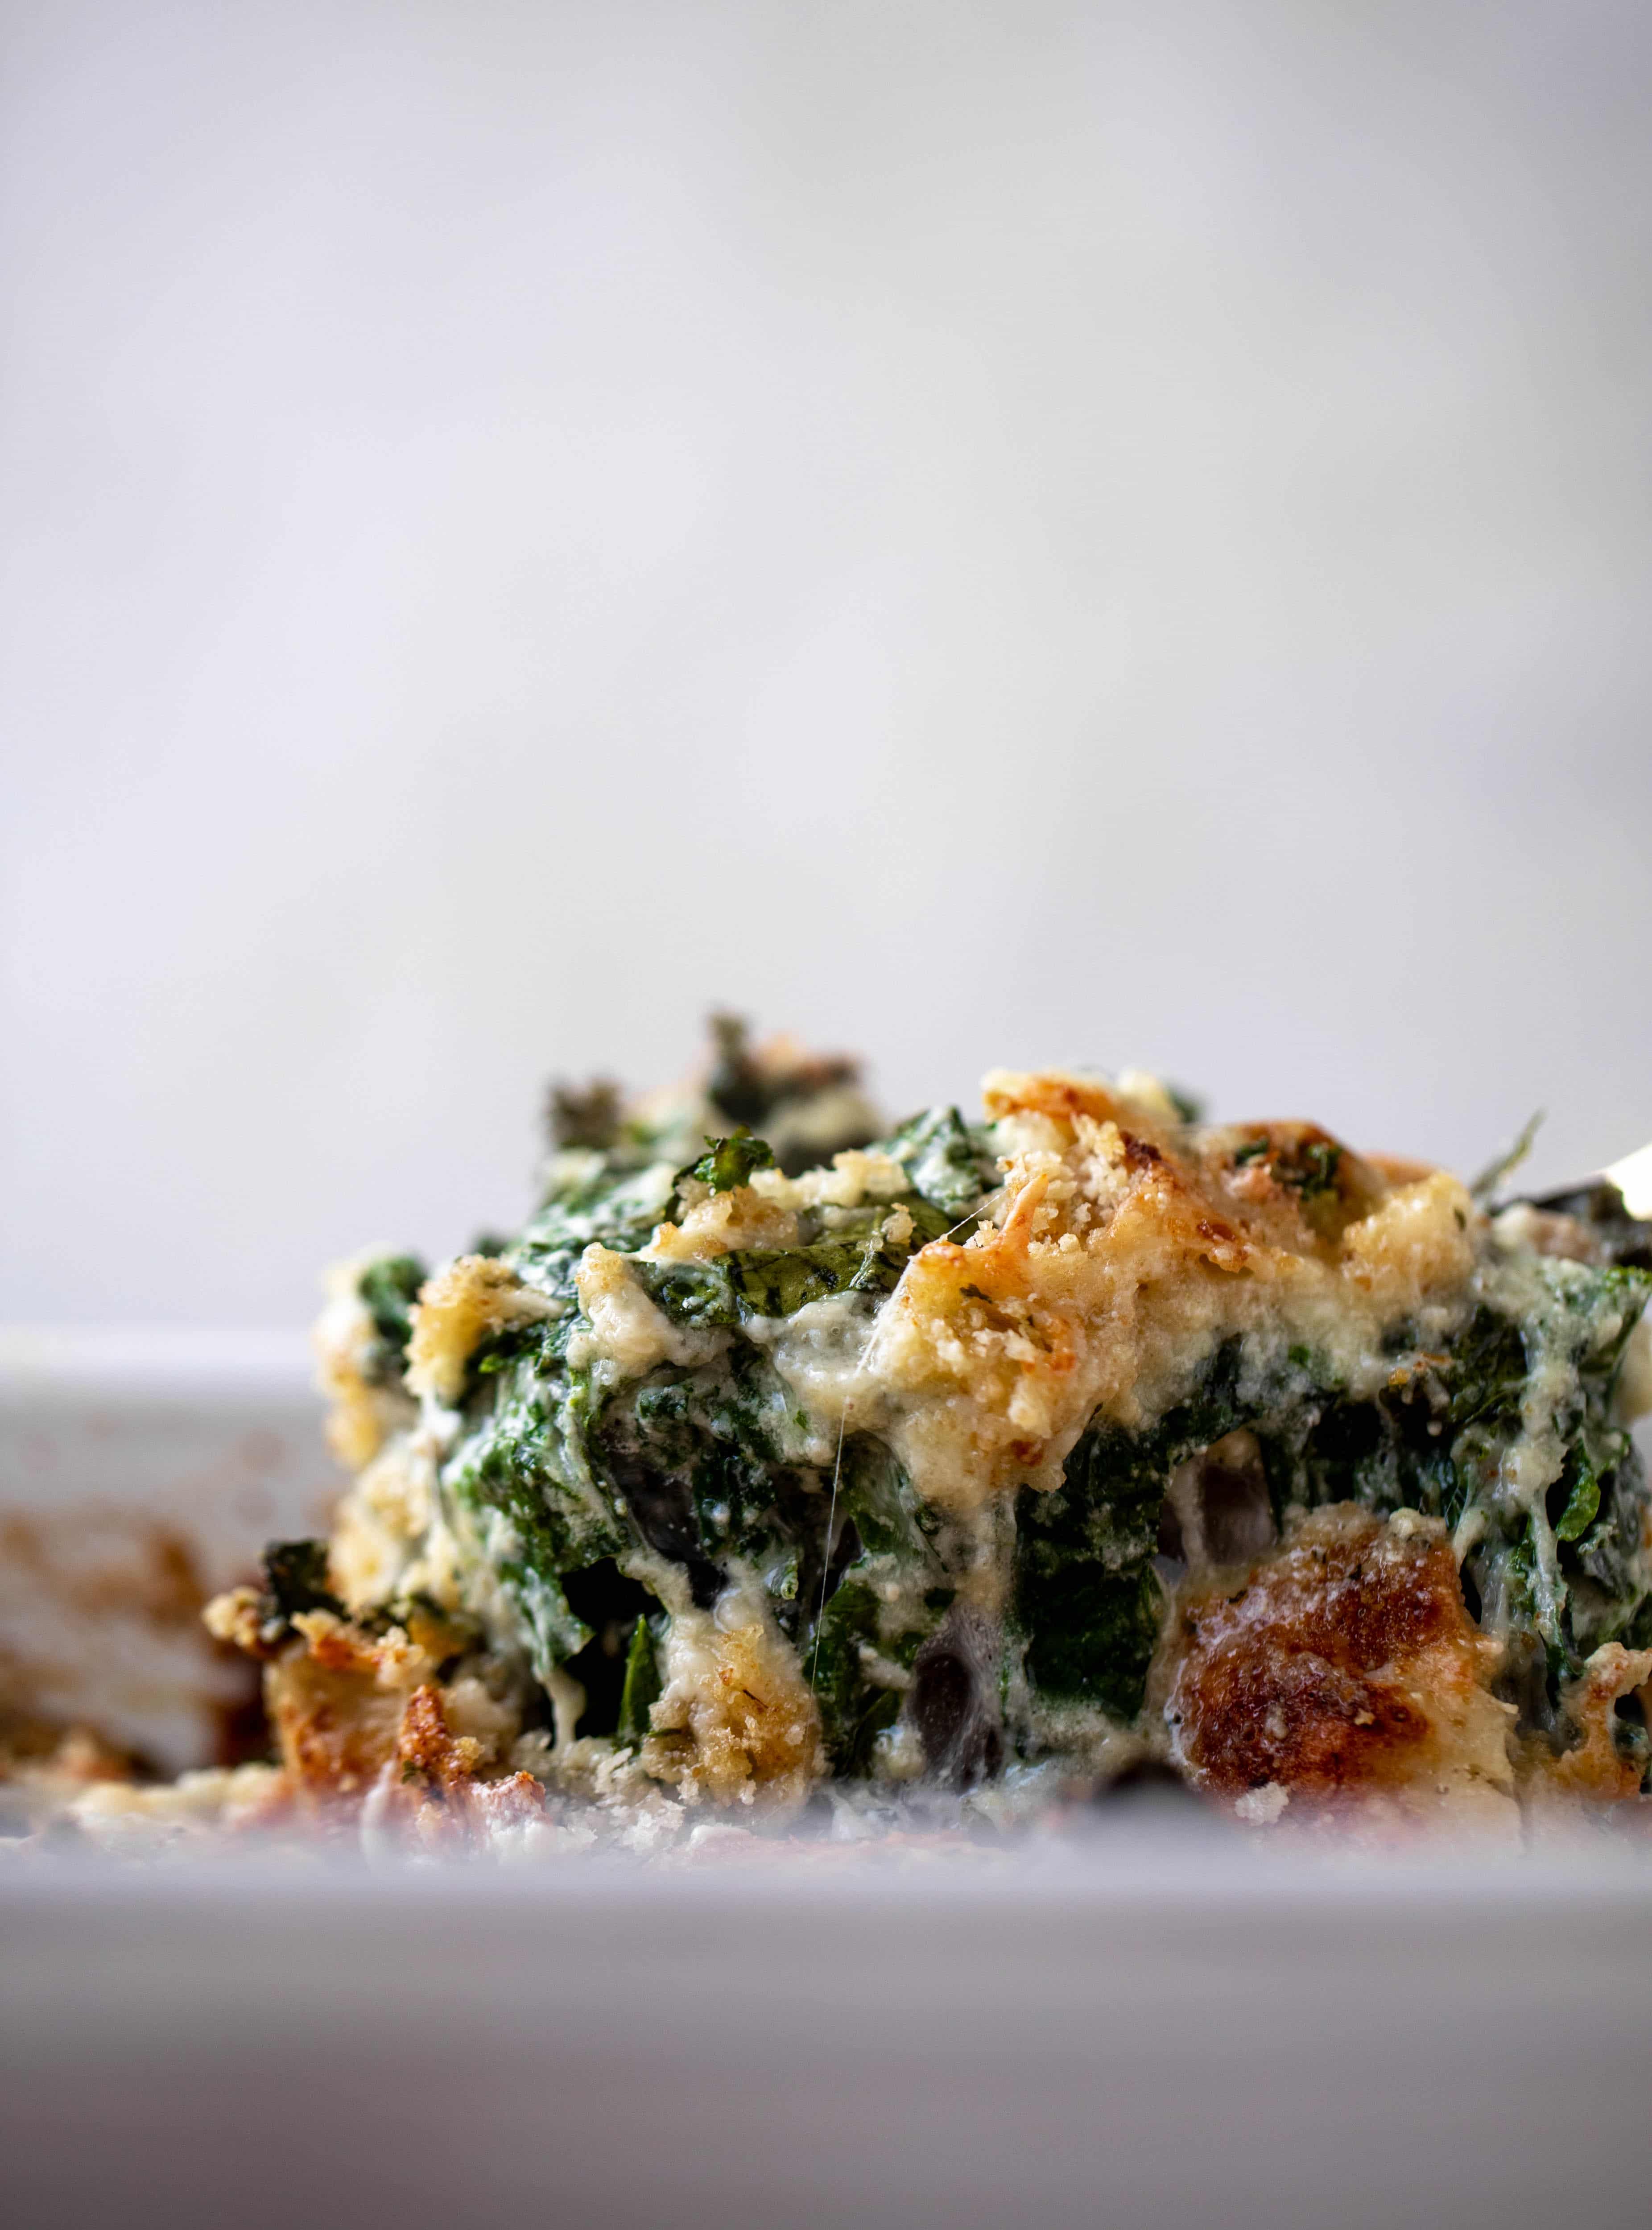 This double kale gratin has two kinds of kale, three kinds of cheese, cream and crunchy breadcrumbs. It will be your new favorite side dish!